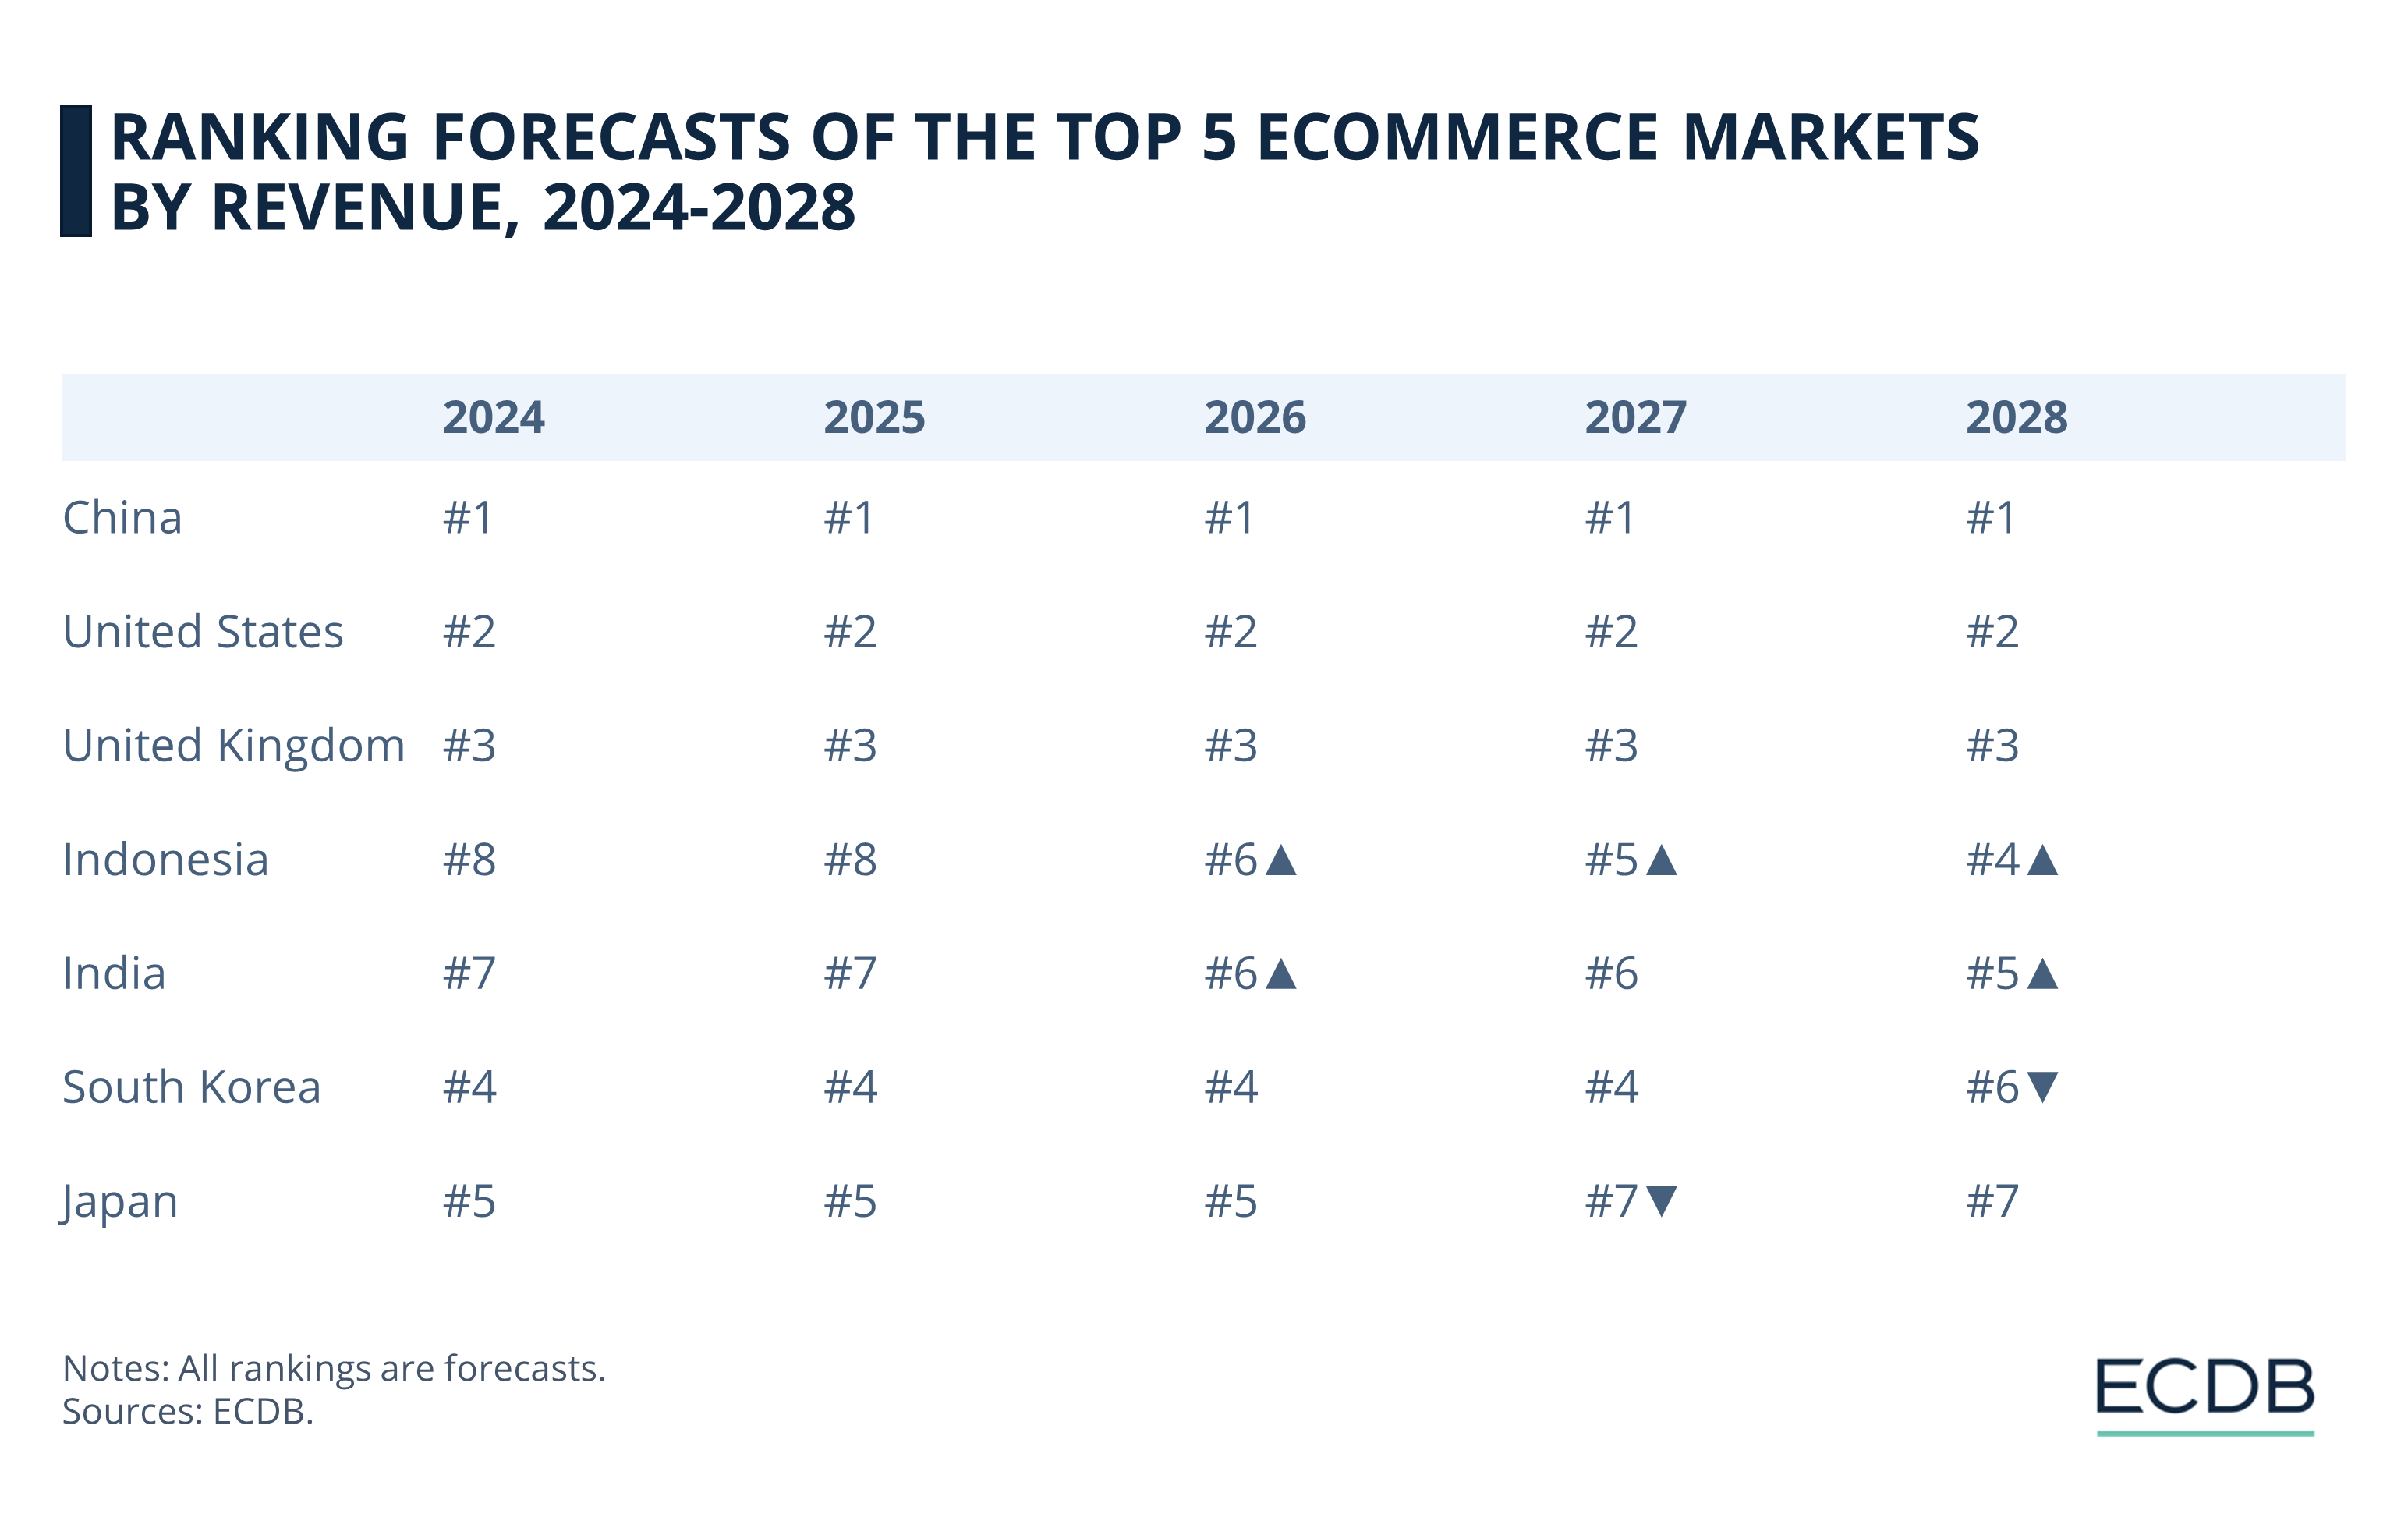 Ranking Forecasts of the Top 5 eCommerce Markets by Revenue, 2024-2028